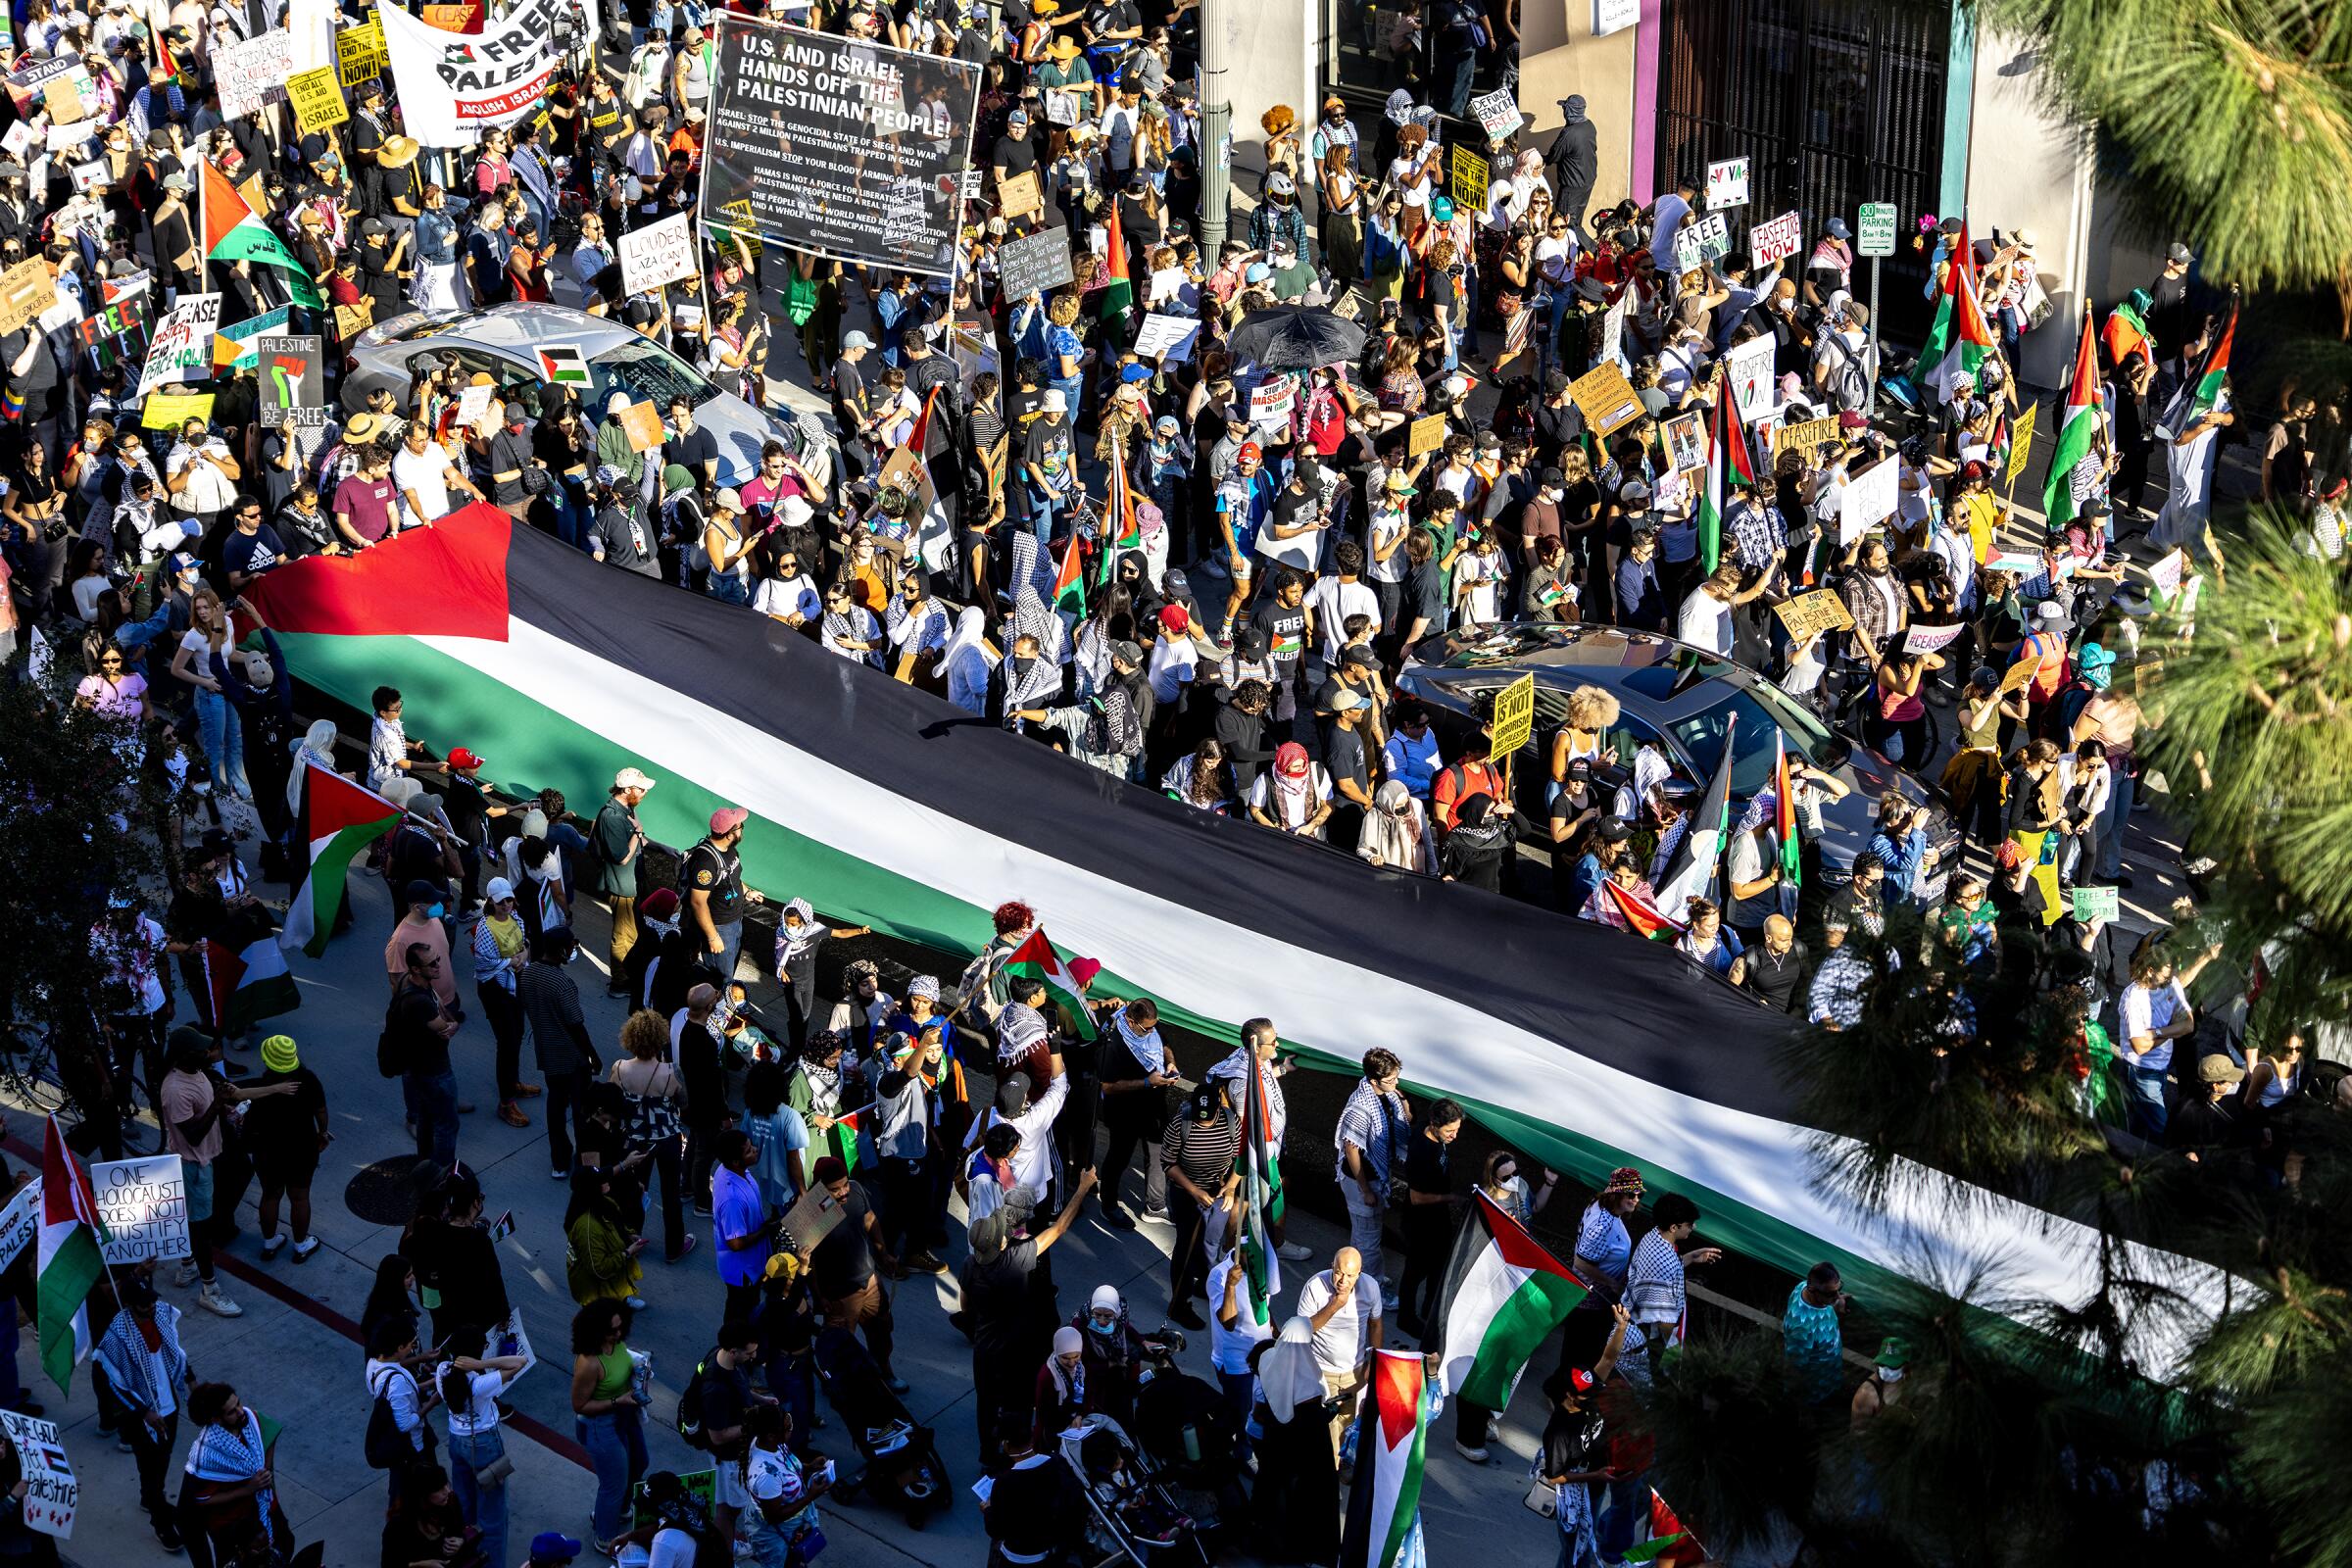  A large Palestinian flag is carried as thousands of demonstrators march in Los Angeles.